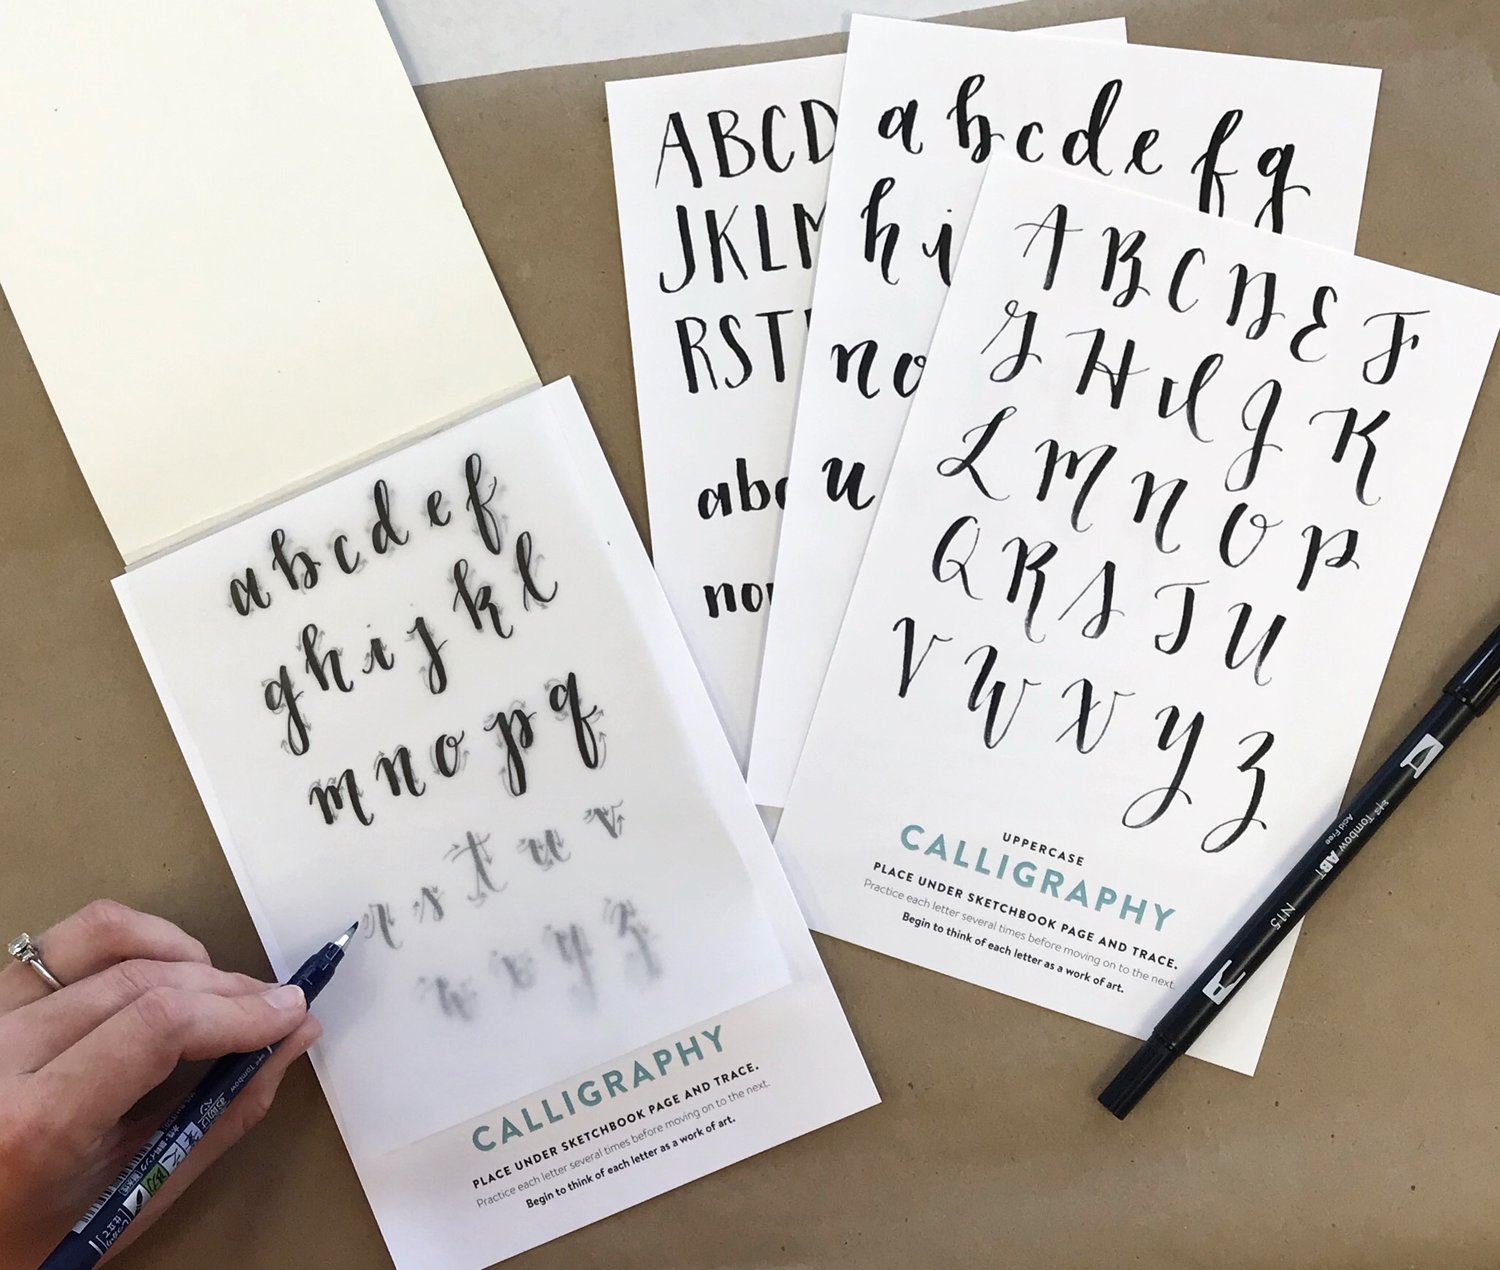  Wildflower Art Studio Hand Lettering Kit - Beginning Hand Lettering  Set with Instructional Booklet and 4 Practice Alphabets - DIY Hand Lettering  for Beginners : Arts, Crafts & Sewing